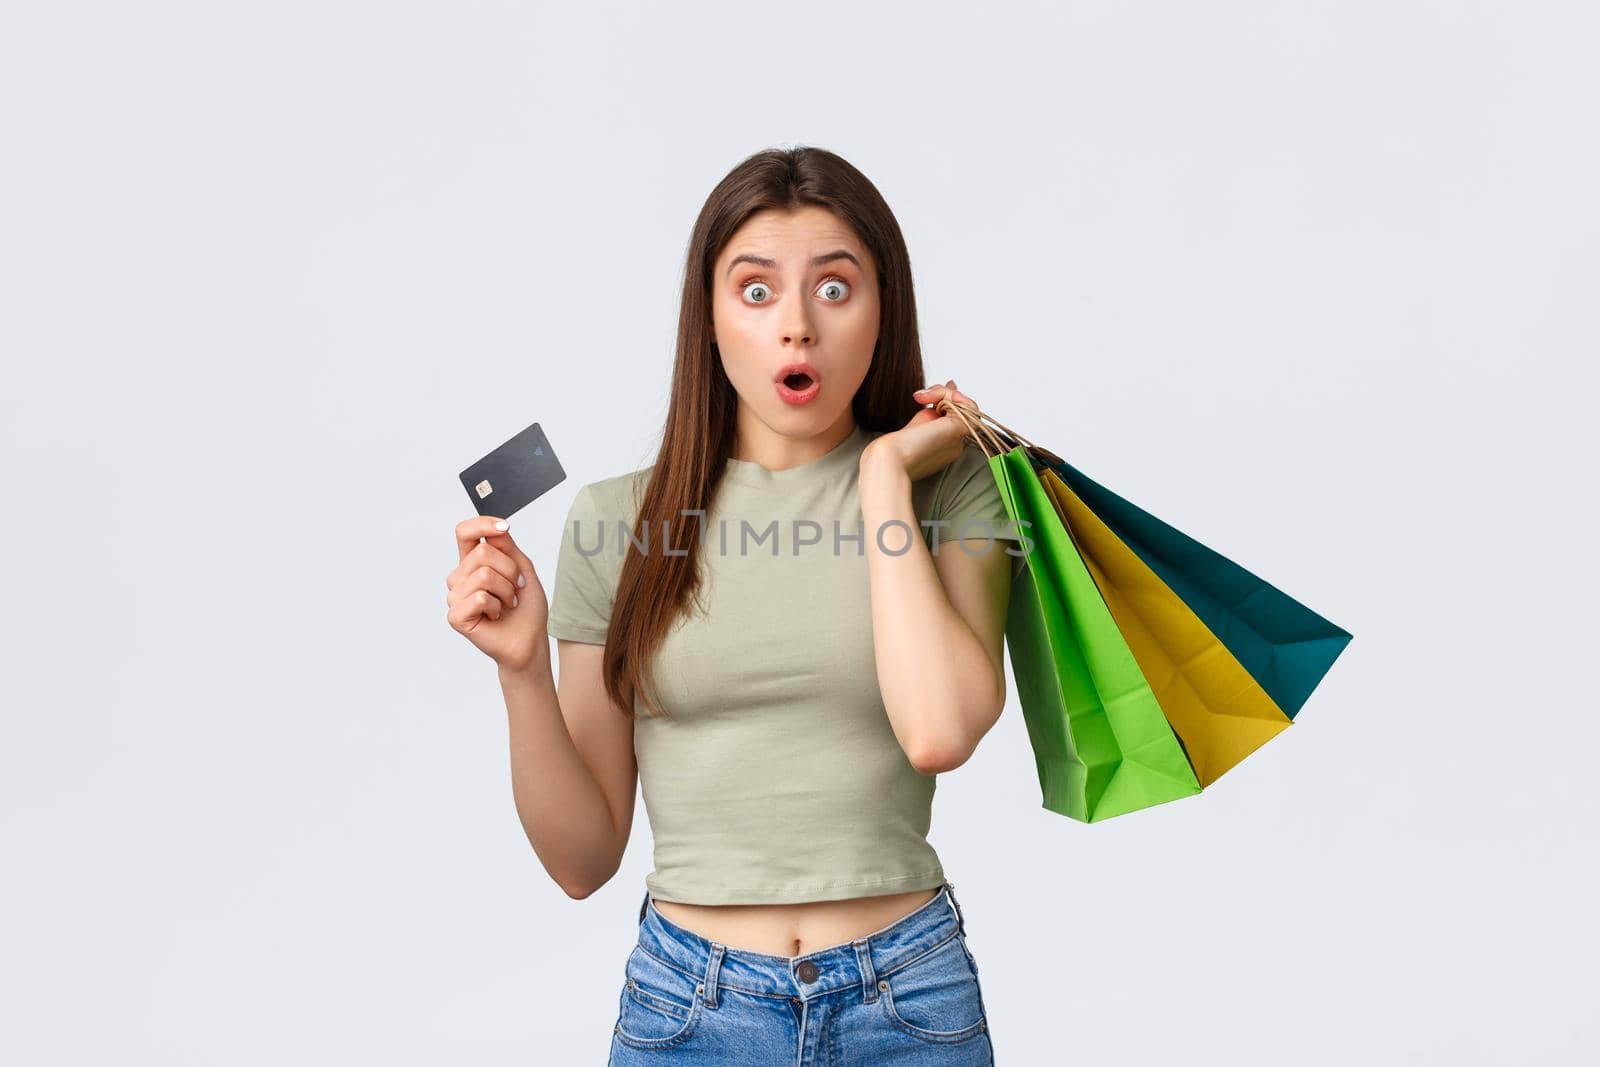 Shopping mall, lifestyle and fashion concept. Shocked and impressed woman with credit card buying new clothes, seeing special discount, hurry up to cashier with bags.